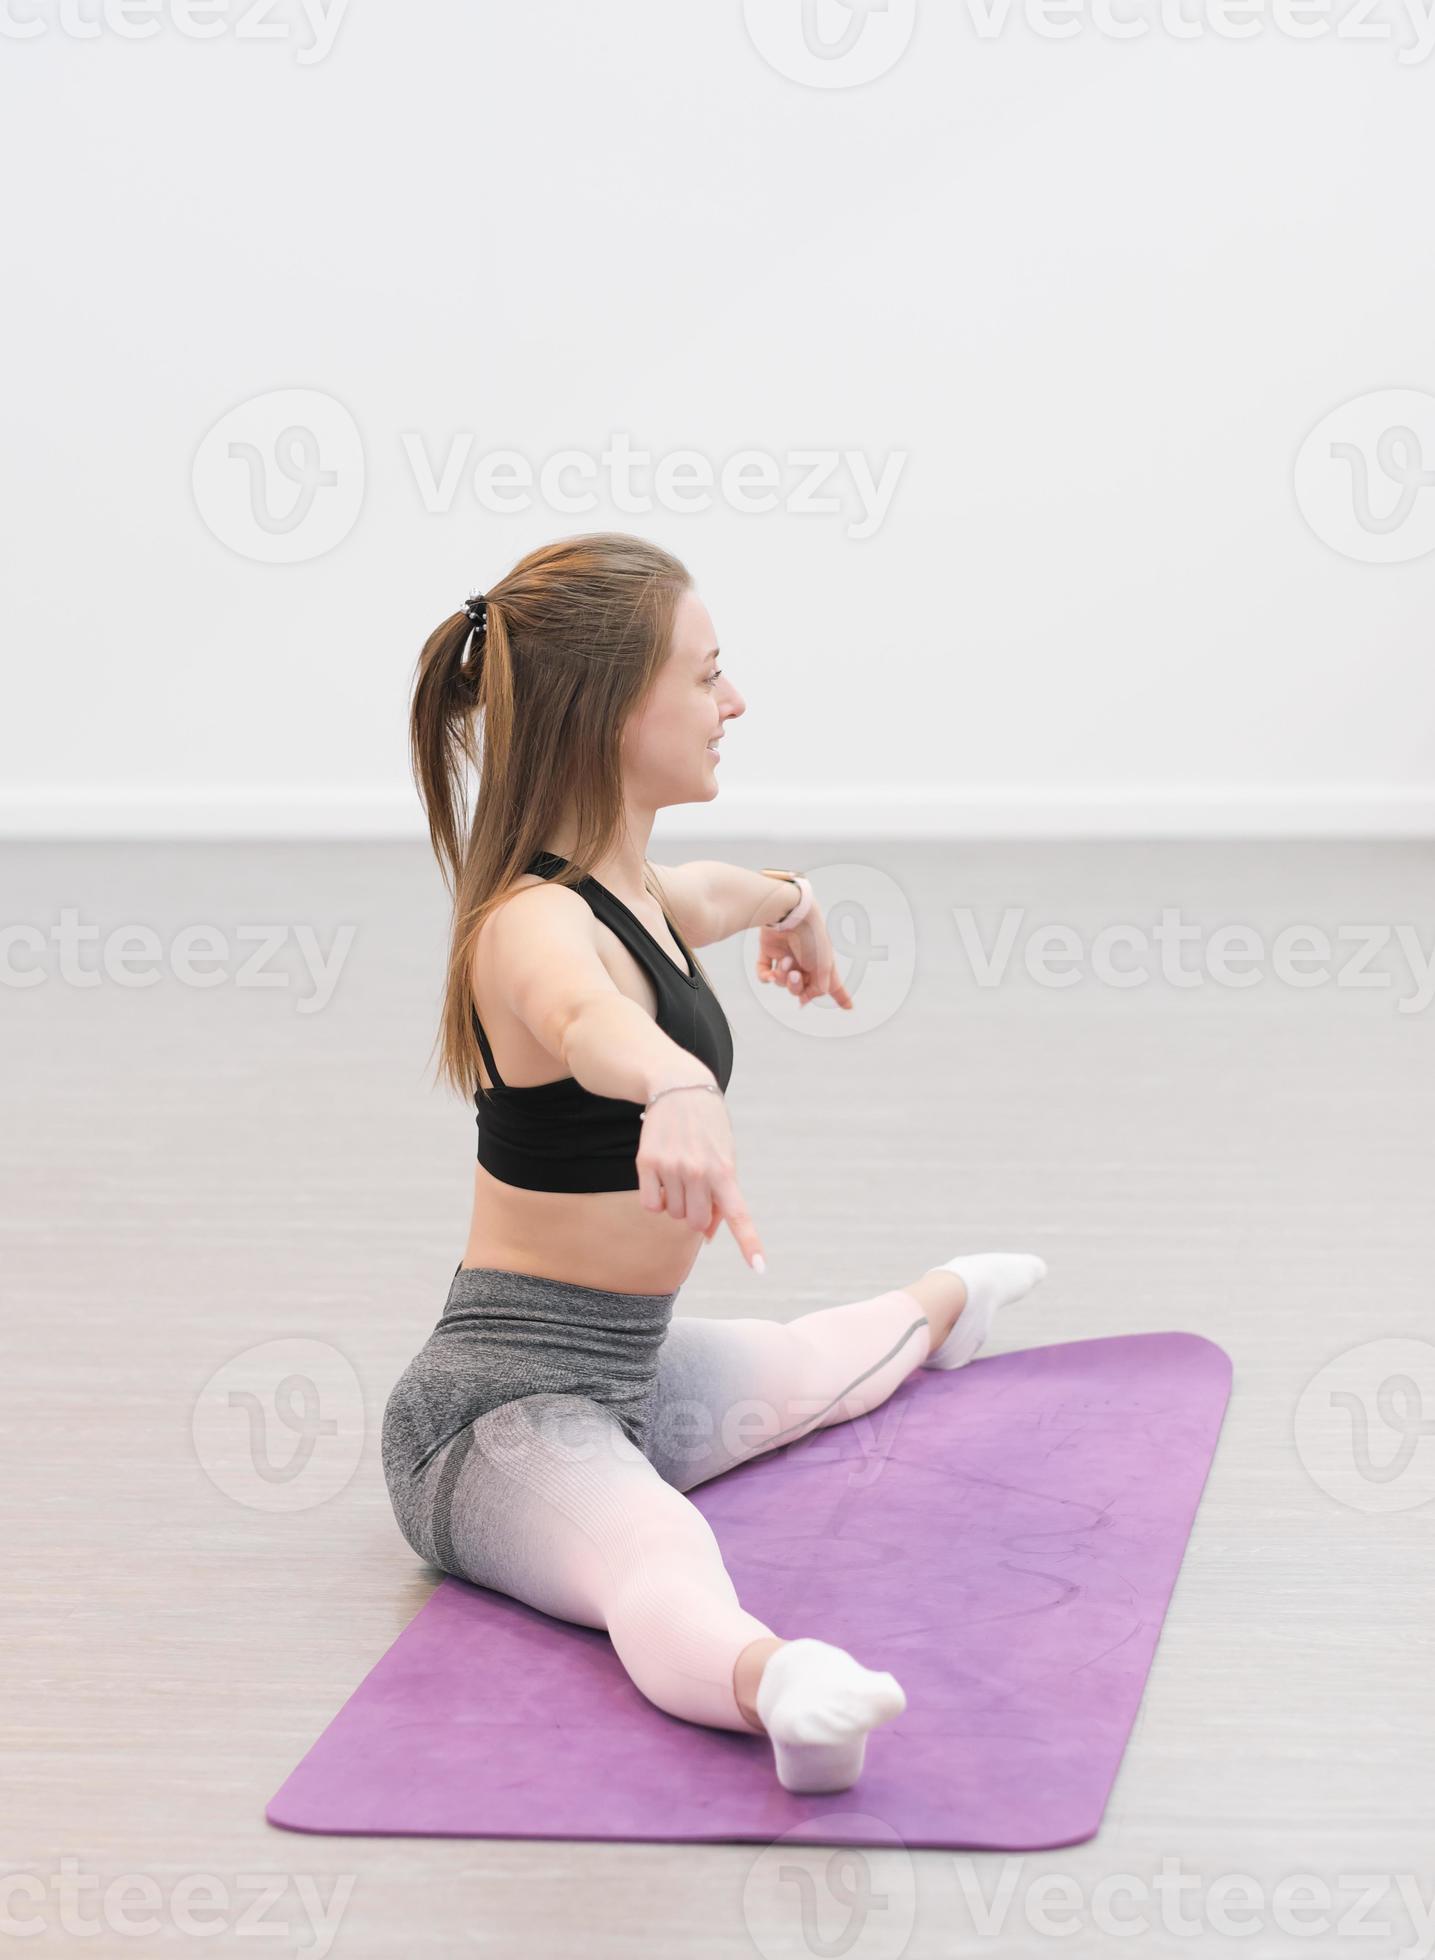 https://static.vecteezy.com/system/resources/previews/013/851/744/large_2x/young-pretty-woman-doing-pilates-and-stretching-workout-on-a-mat-side-view-of-woman-sitting-on-a-floor-and-stretching-leg-split-photo.jpg